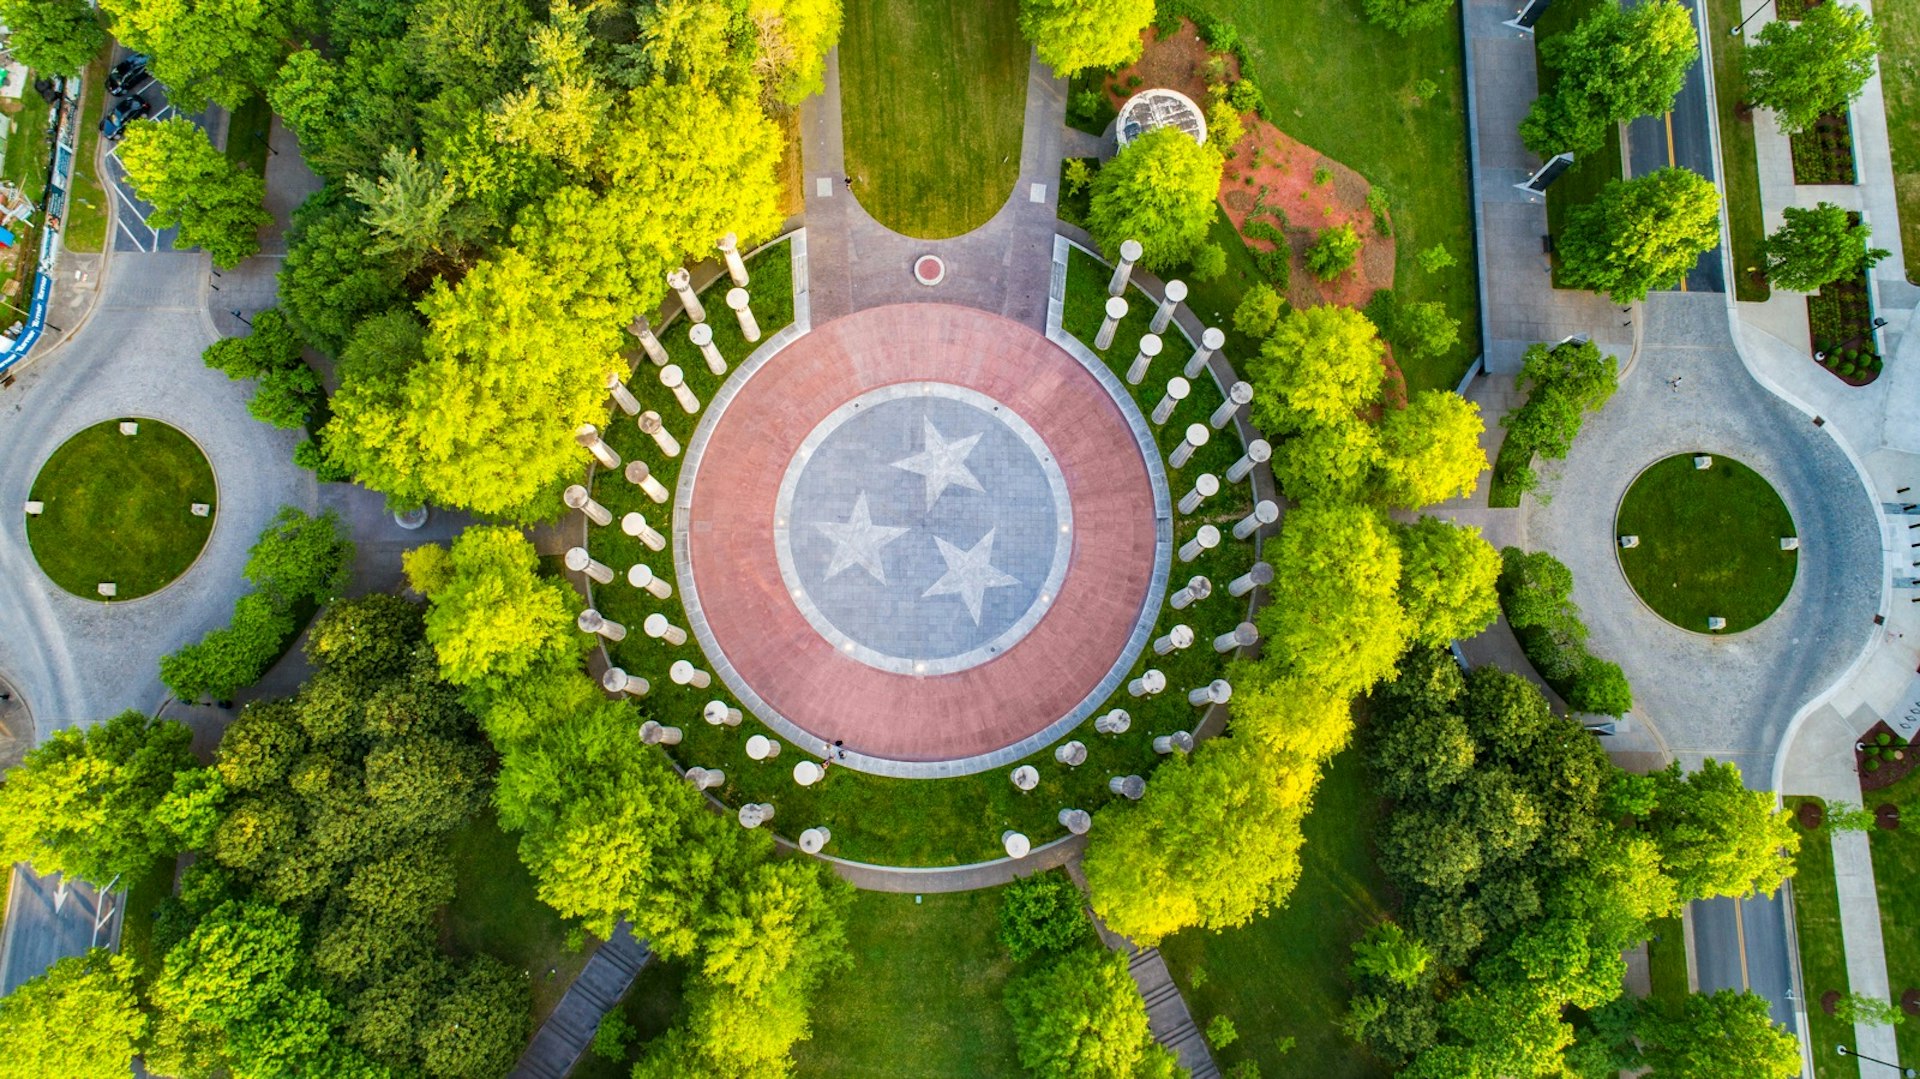 Aerial view of a Bicentennial Capitol Mall with trees and tall pillars. In the middle is circle stone with the Tennessee flag emblem painted on it; weekend Nashville 